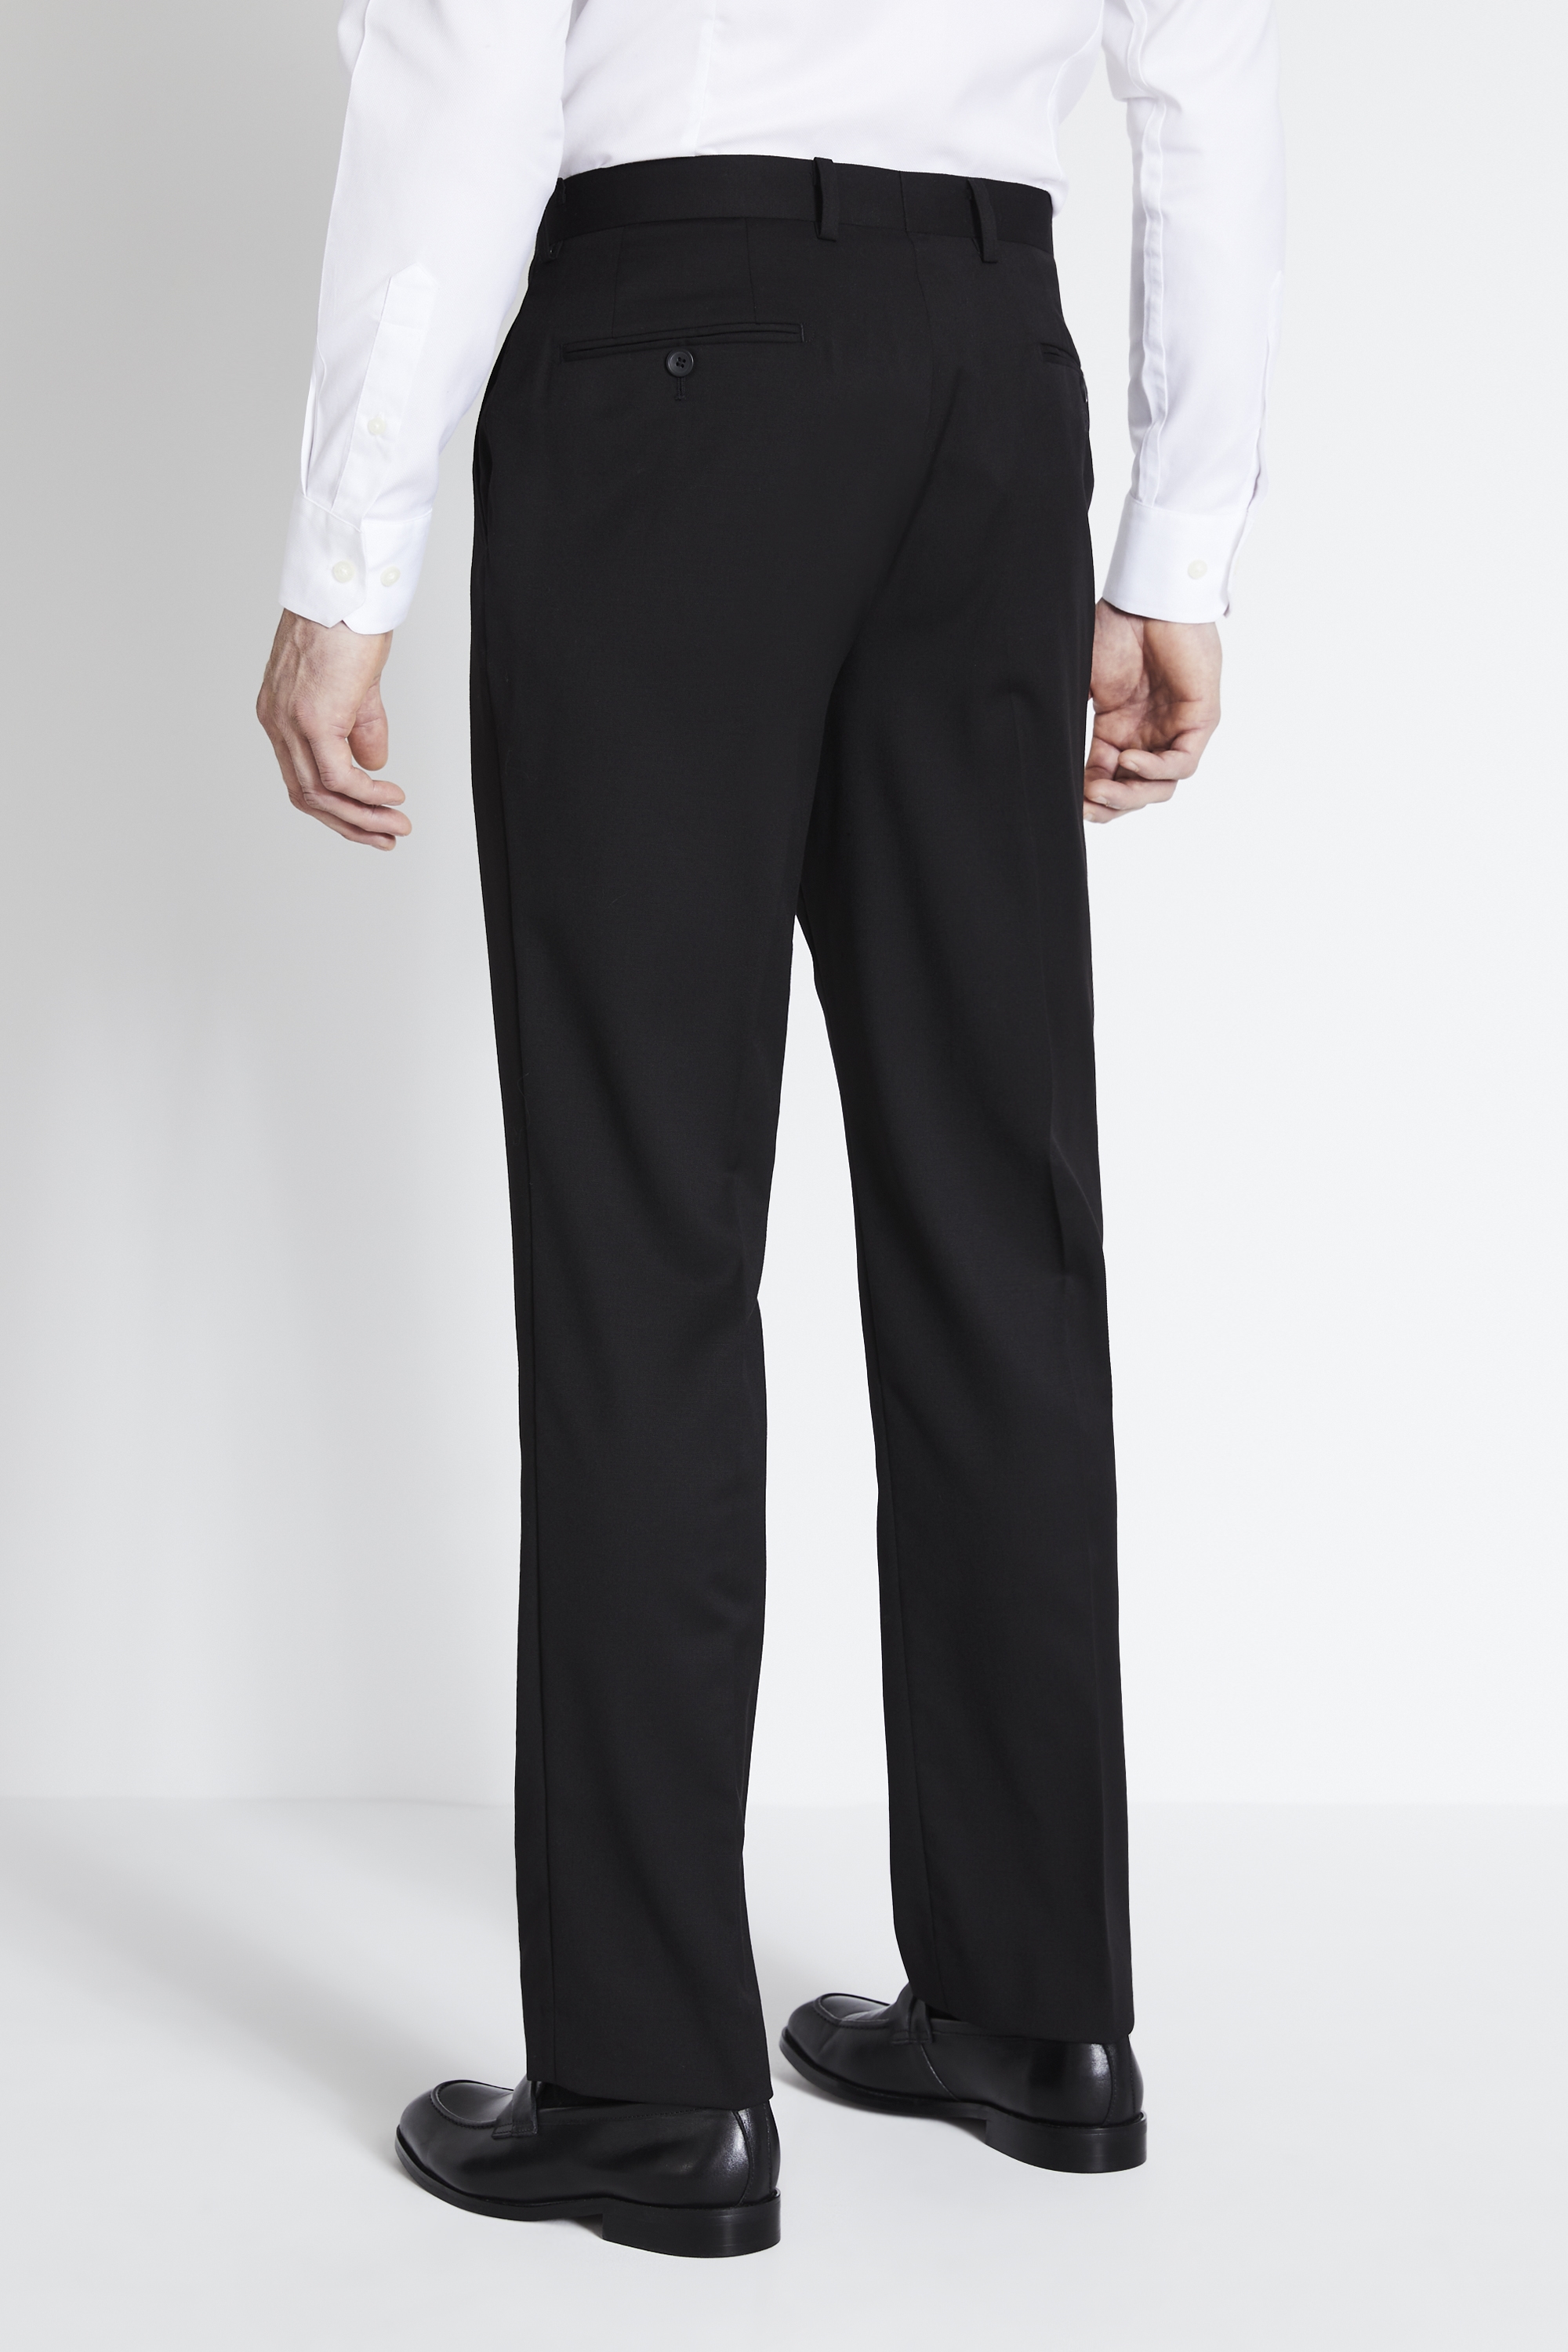 Regular Fit Black Twill Trousers | Buy Online at Moss